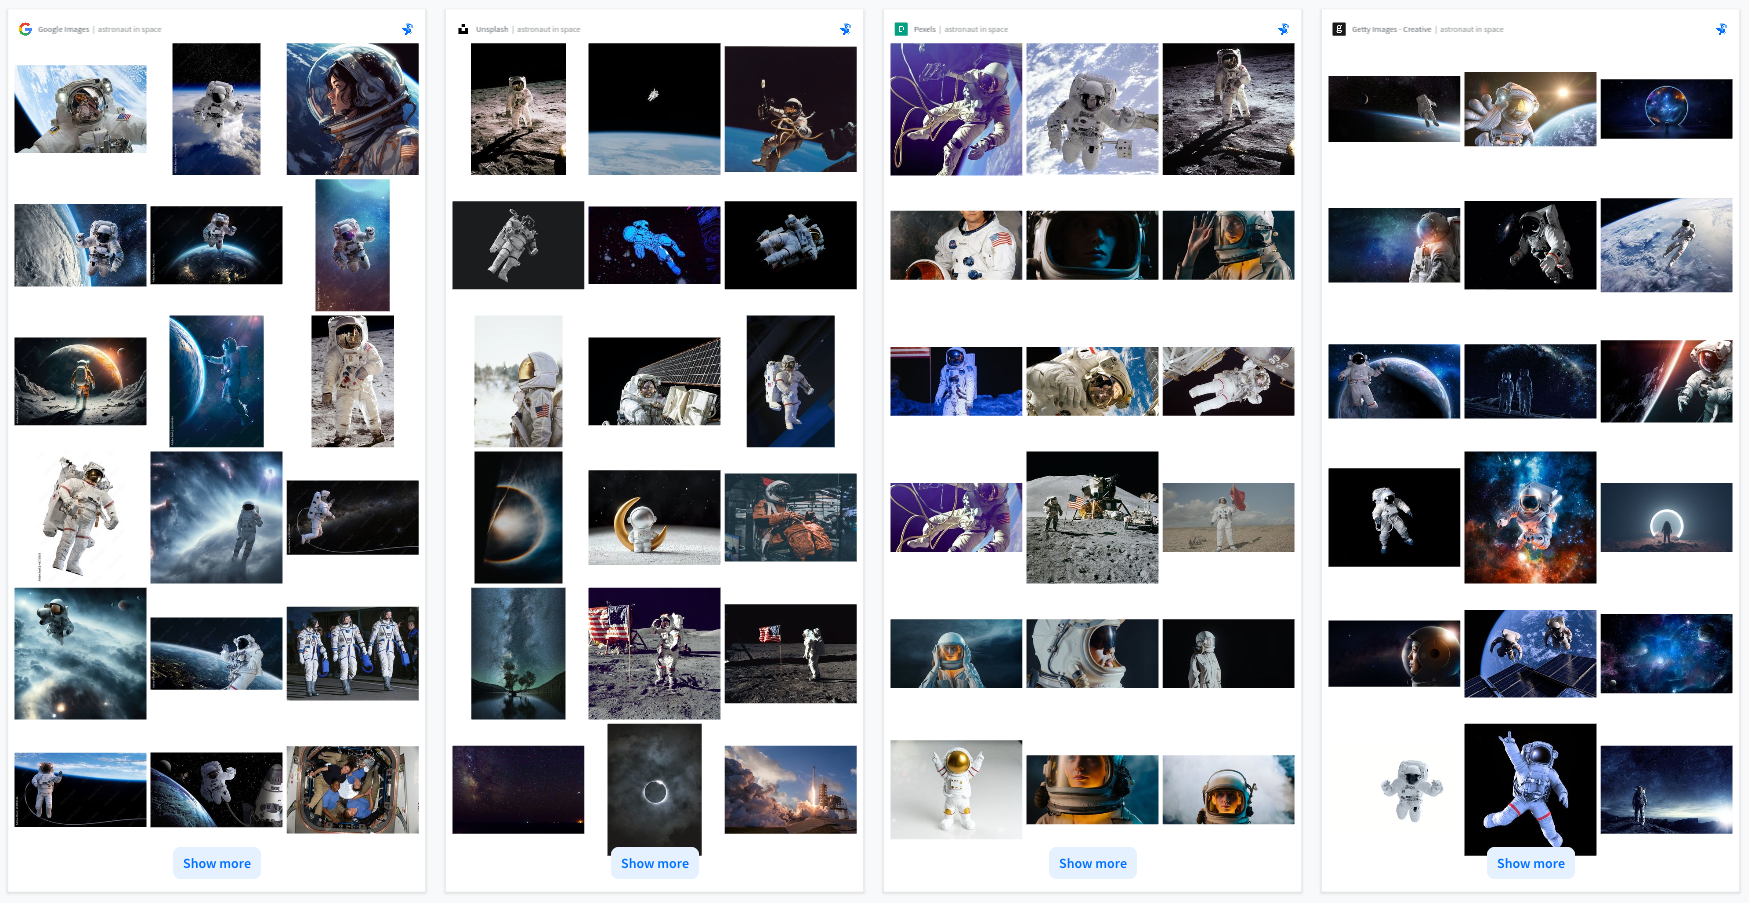 Popsync image results for “astronaut in space” 